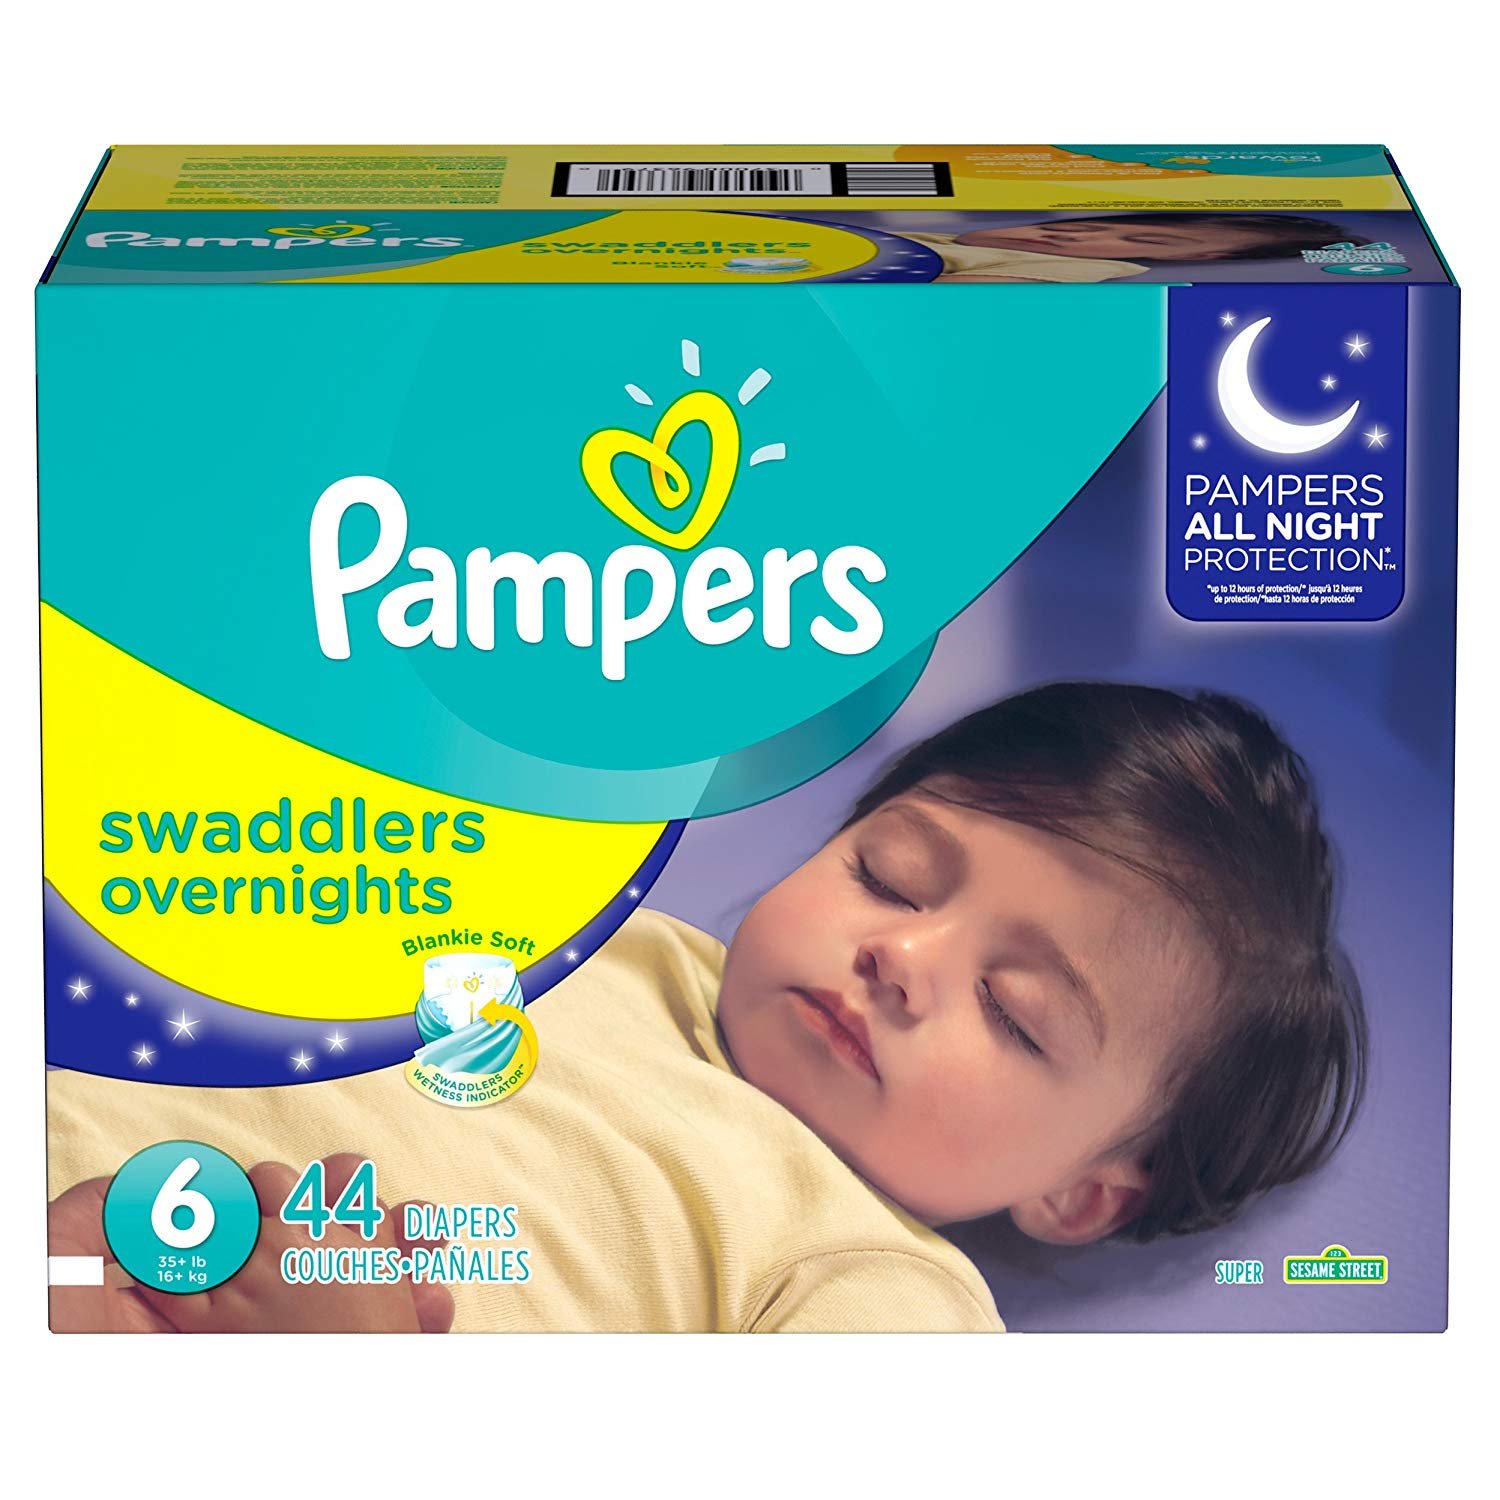 12 Best Overnight Diapers 2022 & Reusable Overnight Diapers 2